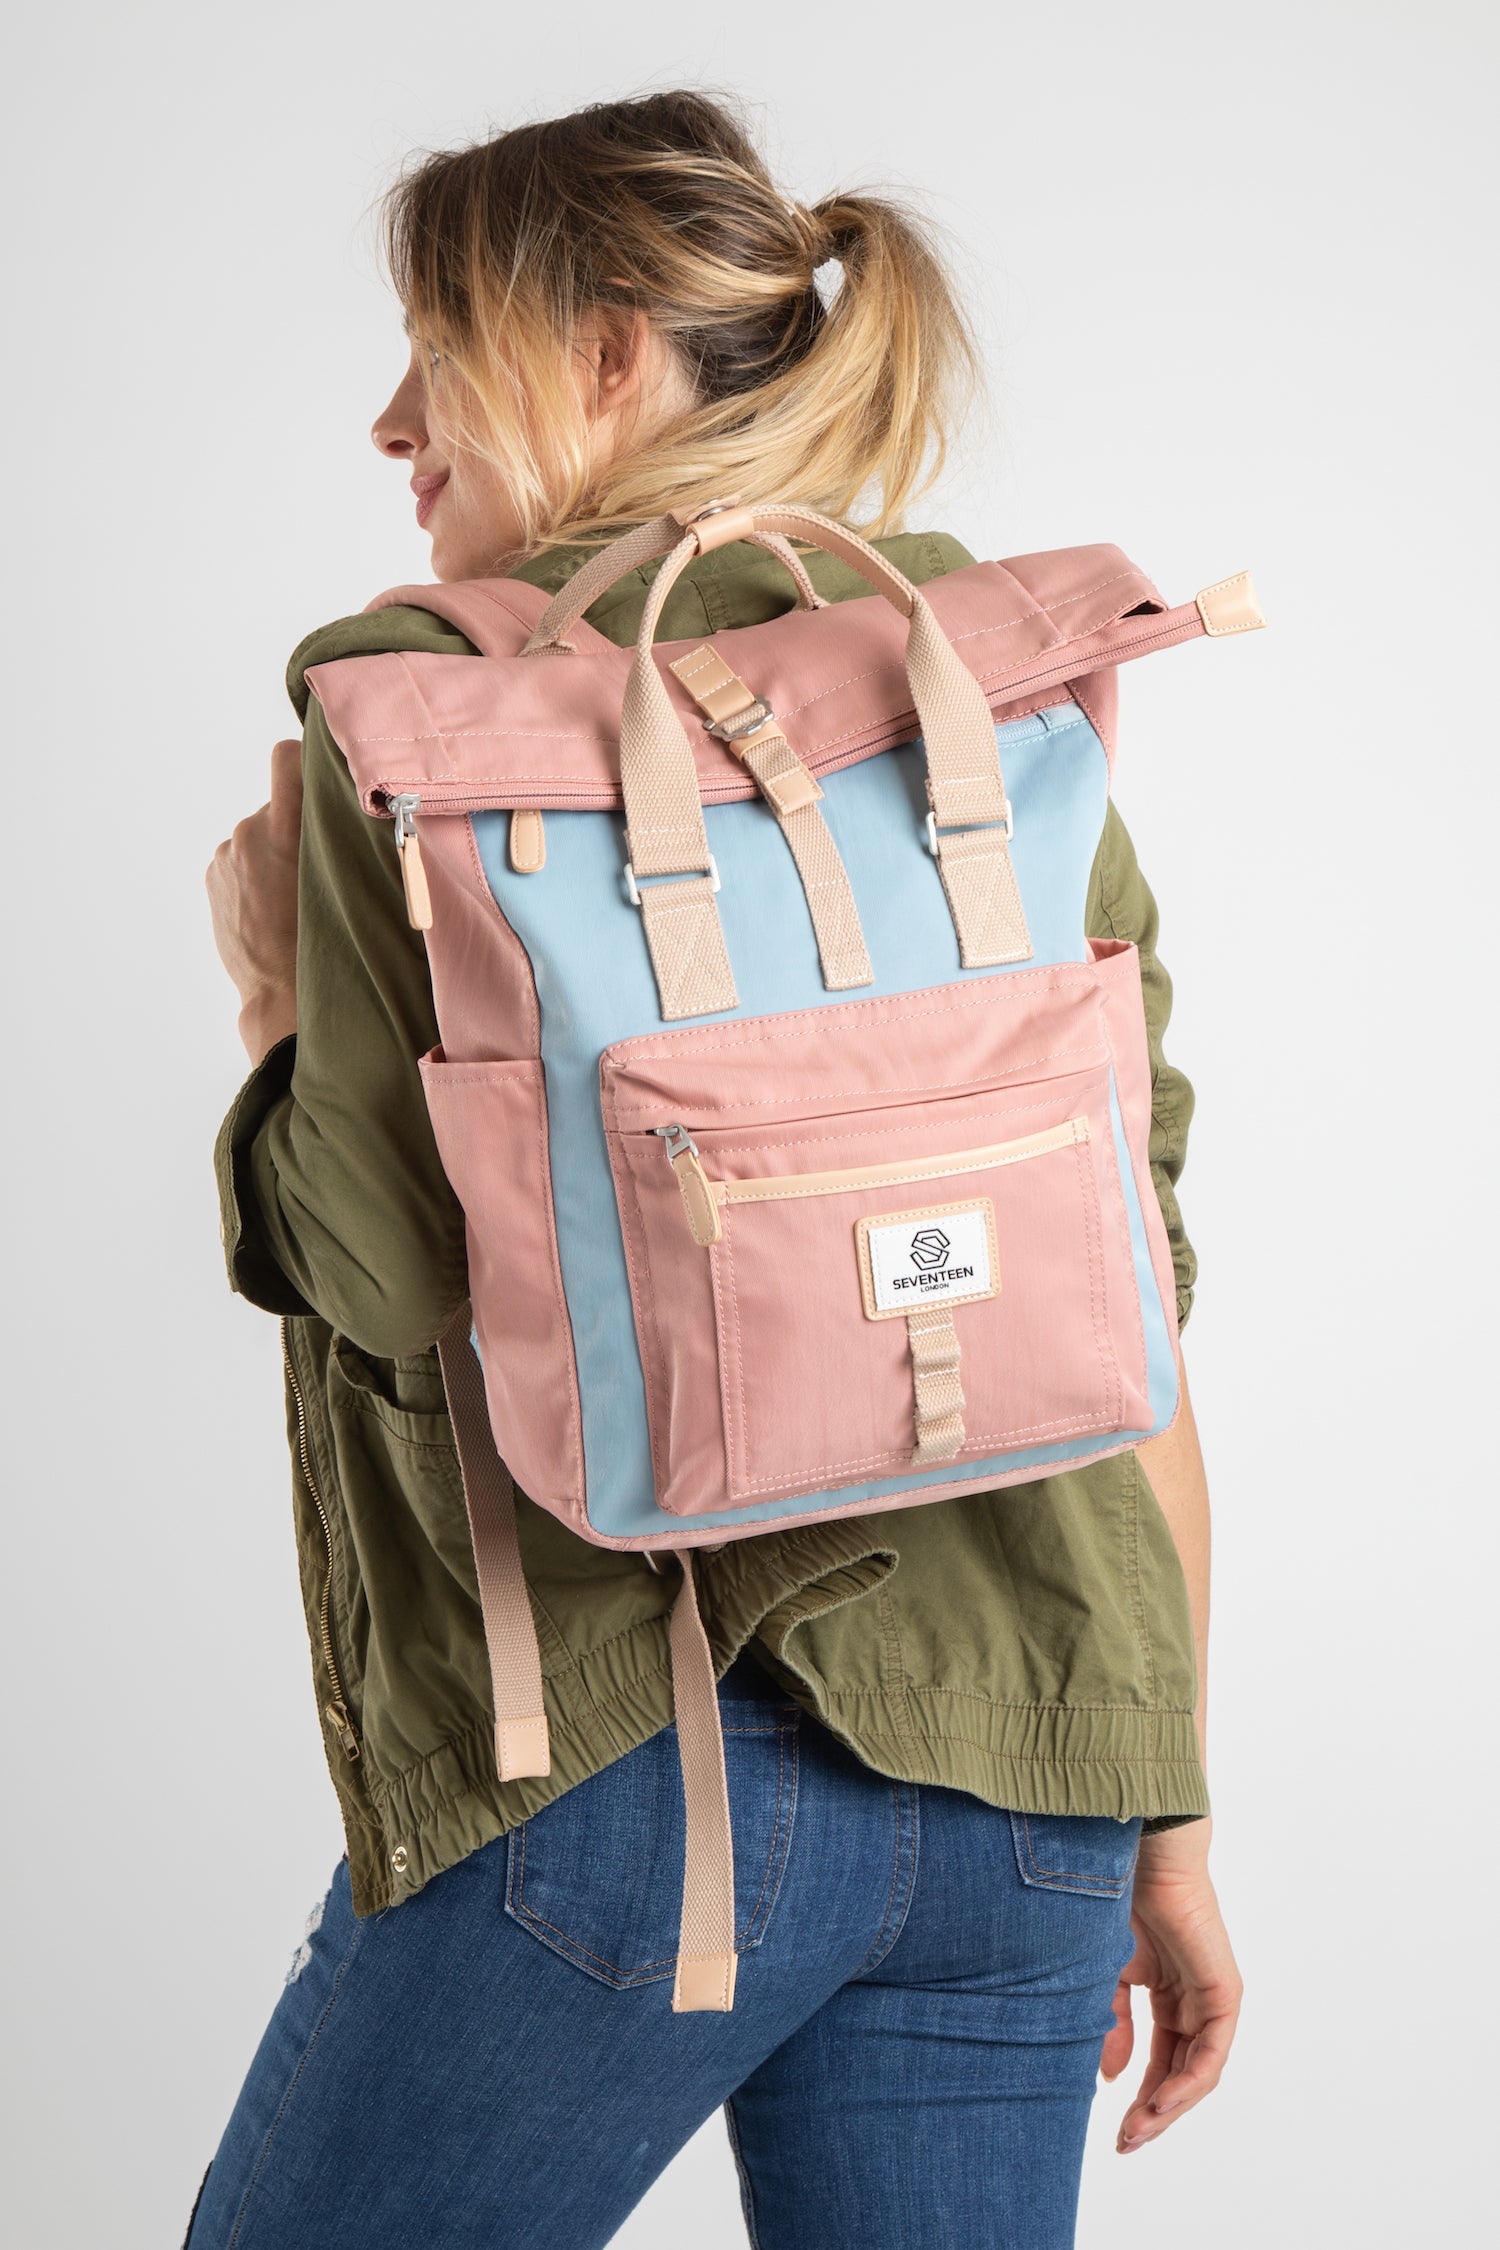 Canary Wharf Backpack - Pink with Light Blue